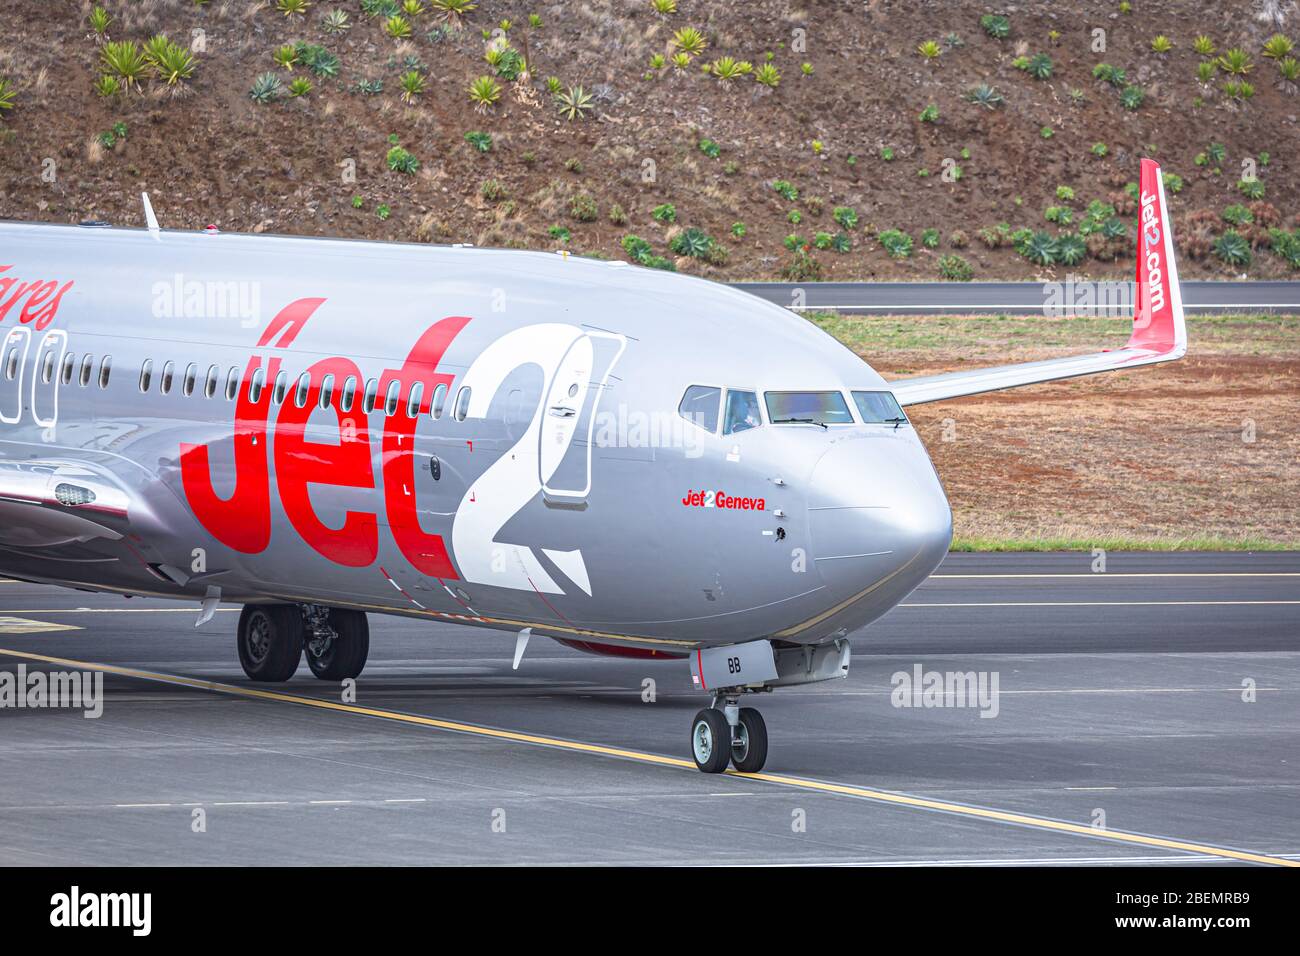 Jet2 Boeing 737-800 (G-JZBB) taxiing at Cristiano Ronaldo Madeira International Airport, Madeira, Portugal Stock Photo